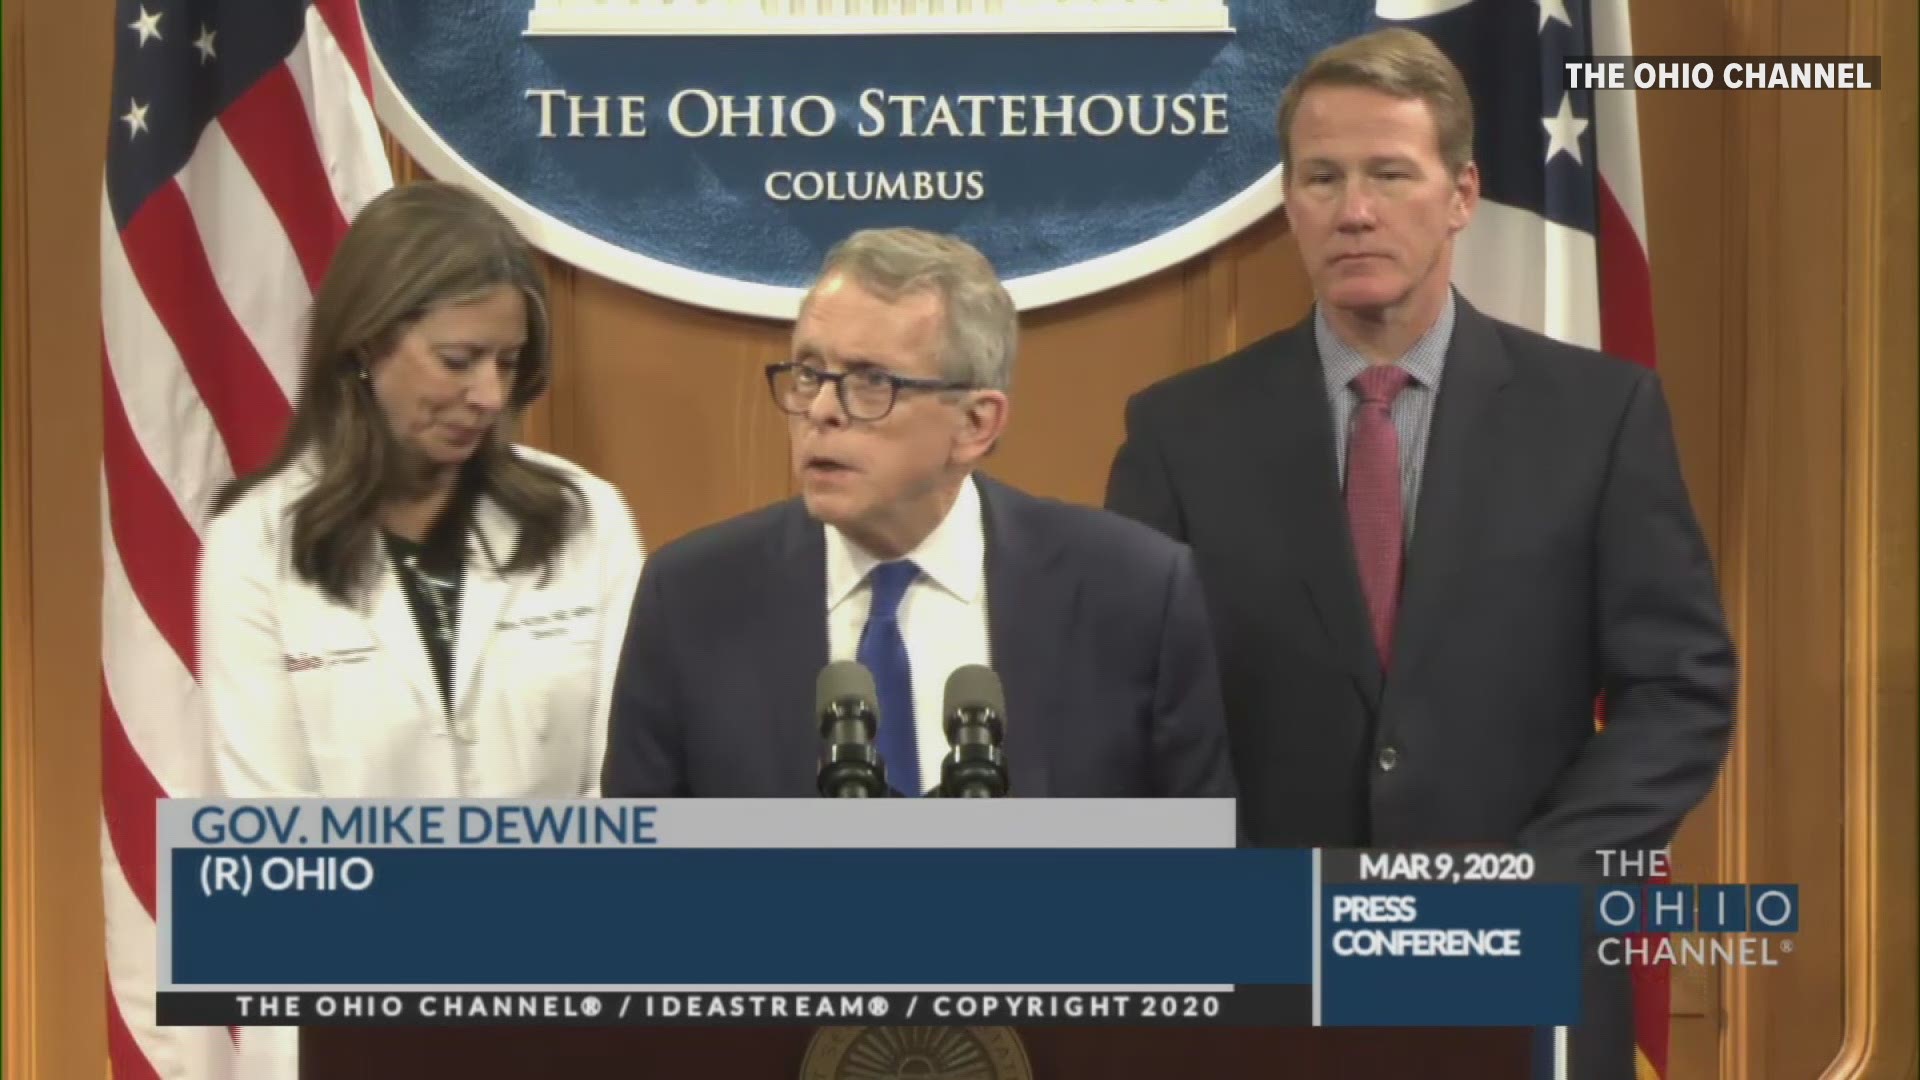 Ohio Governor Mike DeWine has confirmed that there are now three cases of coronavirus in the state. All three of the cases are from Cuyahoga County.